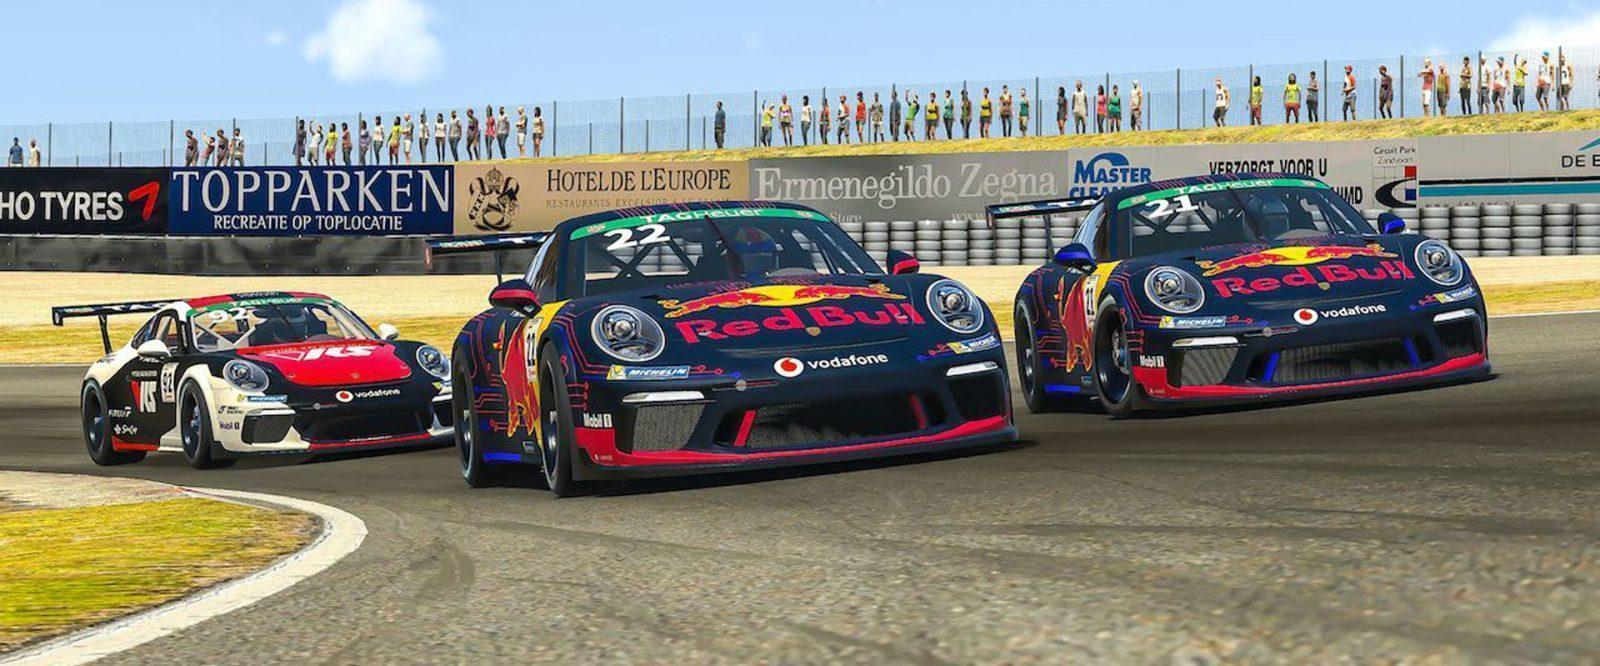 Red Bull drivers dominate at Porsche Supercup